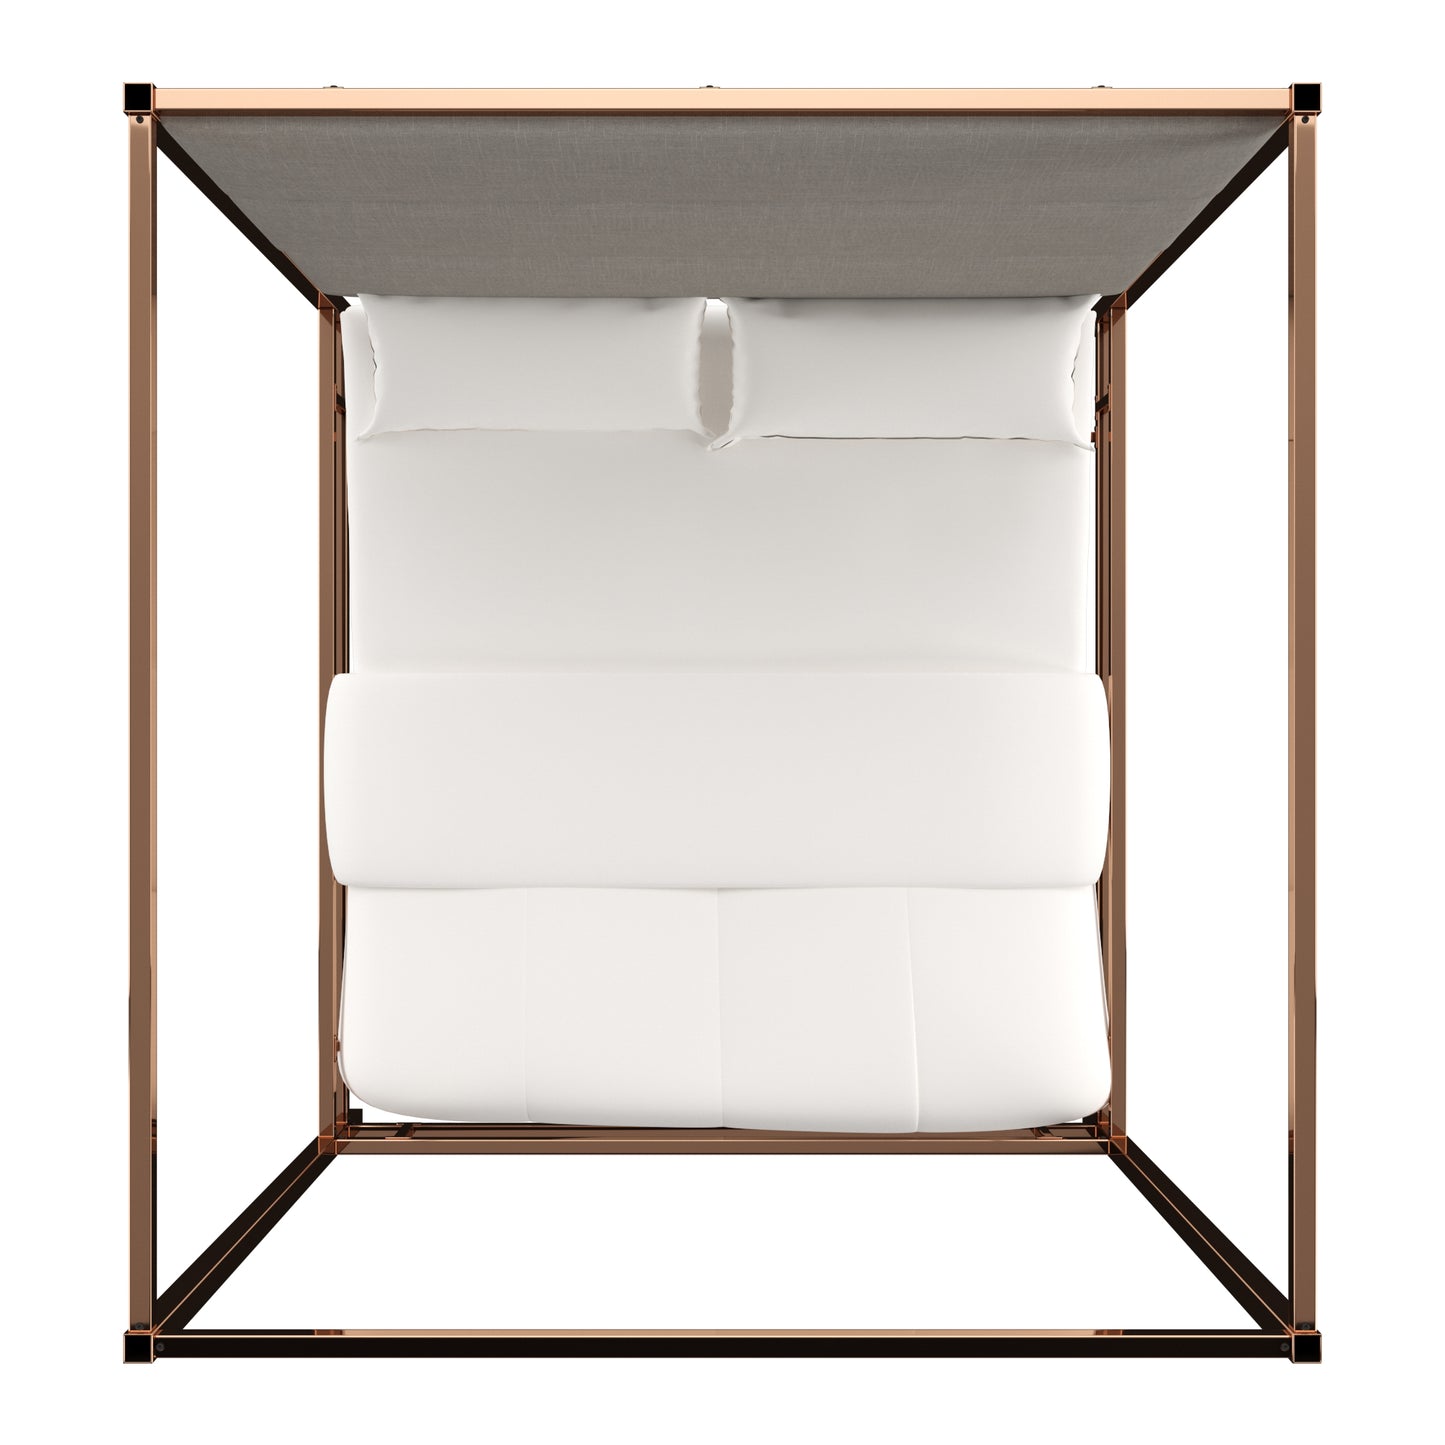 Metal Canopy Bed with Linen Panel Headboard - Grey Linen, Champagne Gold Finish, King Size